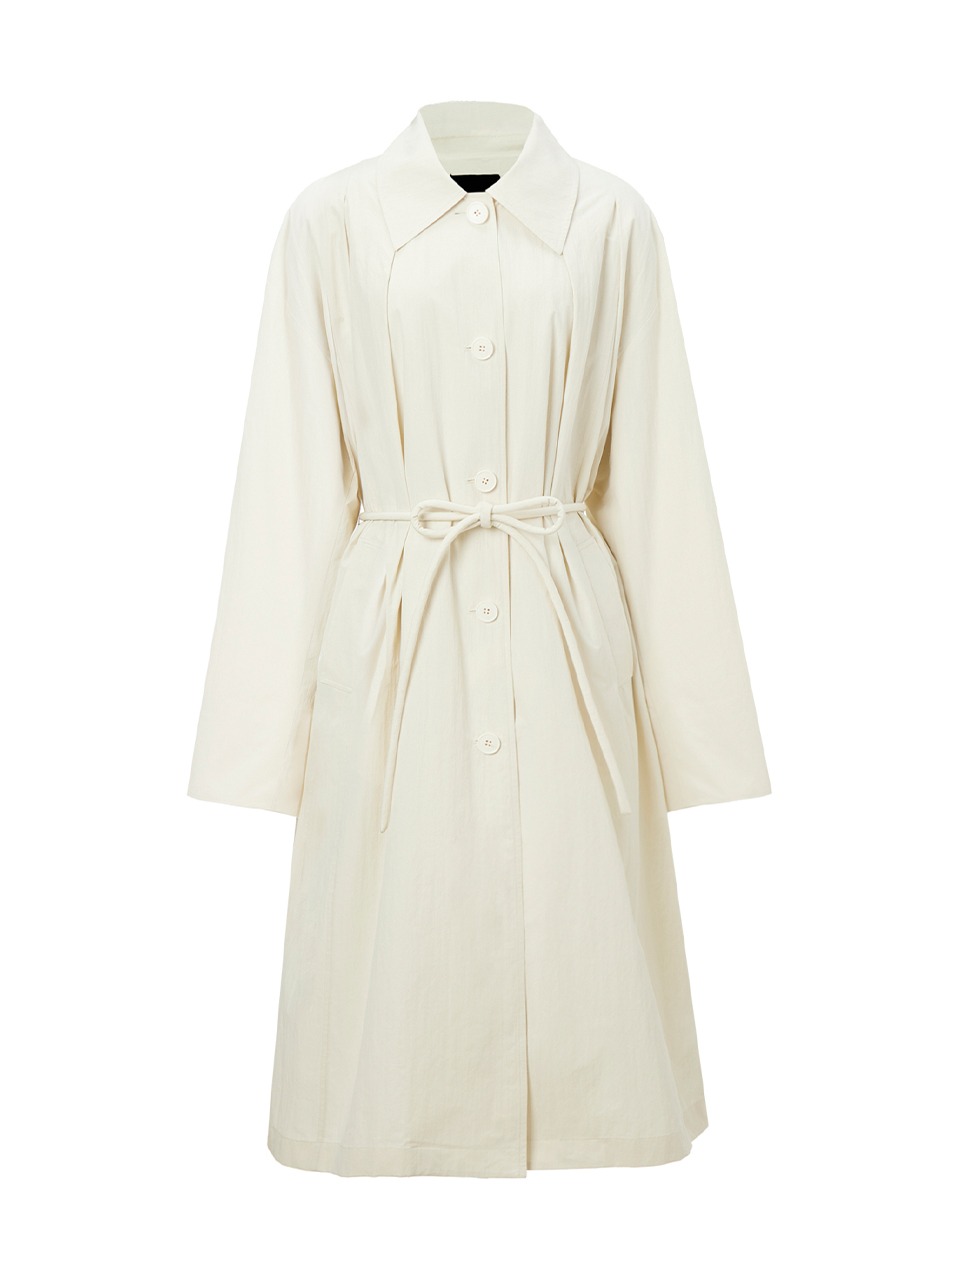 Numer Cotton Trench Coat Ivory Lace